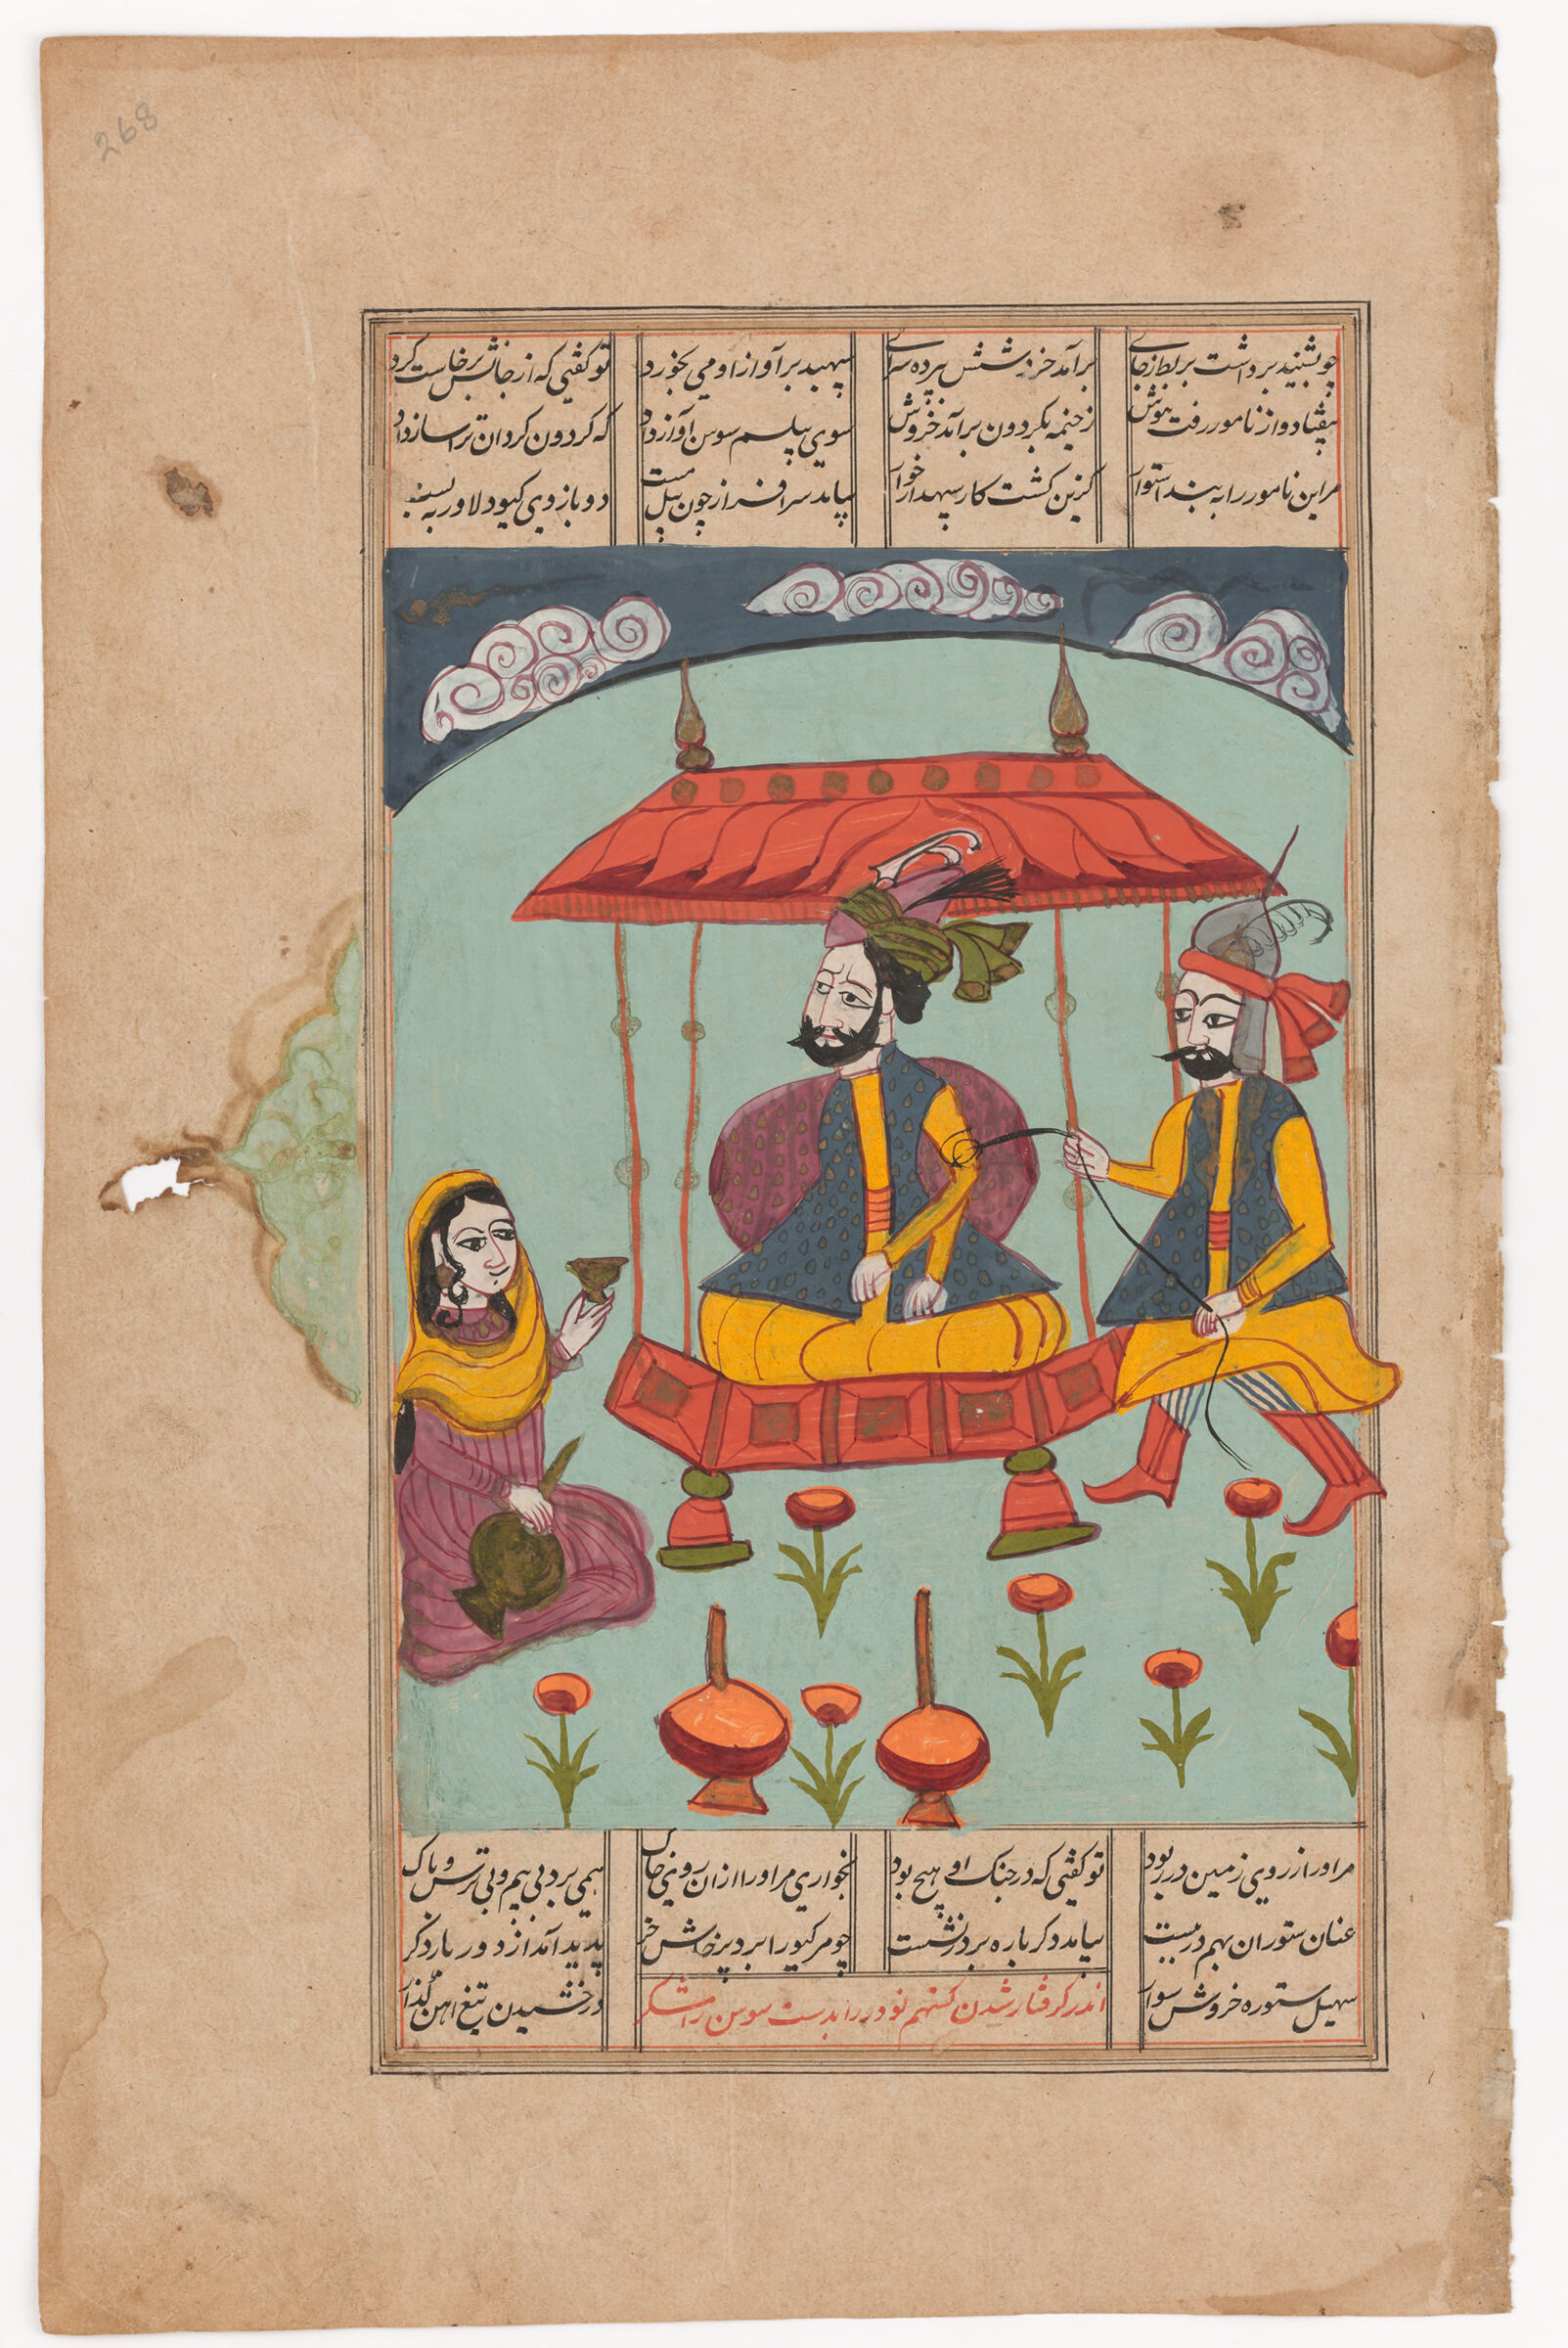 Giv Falls Under The Spell Of Susan (Painting Recto; Text Verso Of Folio 268), Illustrated Folio From A Manuscript Of The Shahnama By Firdawsi